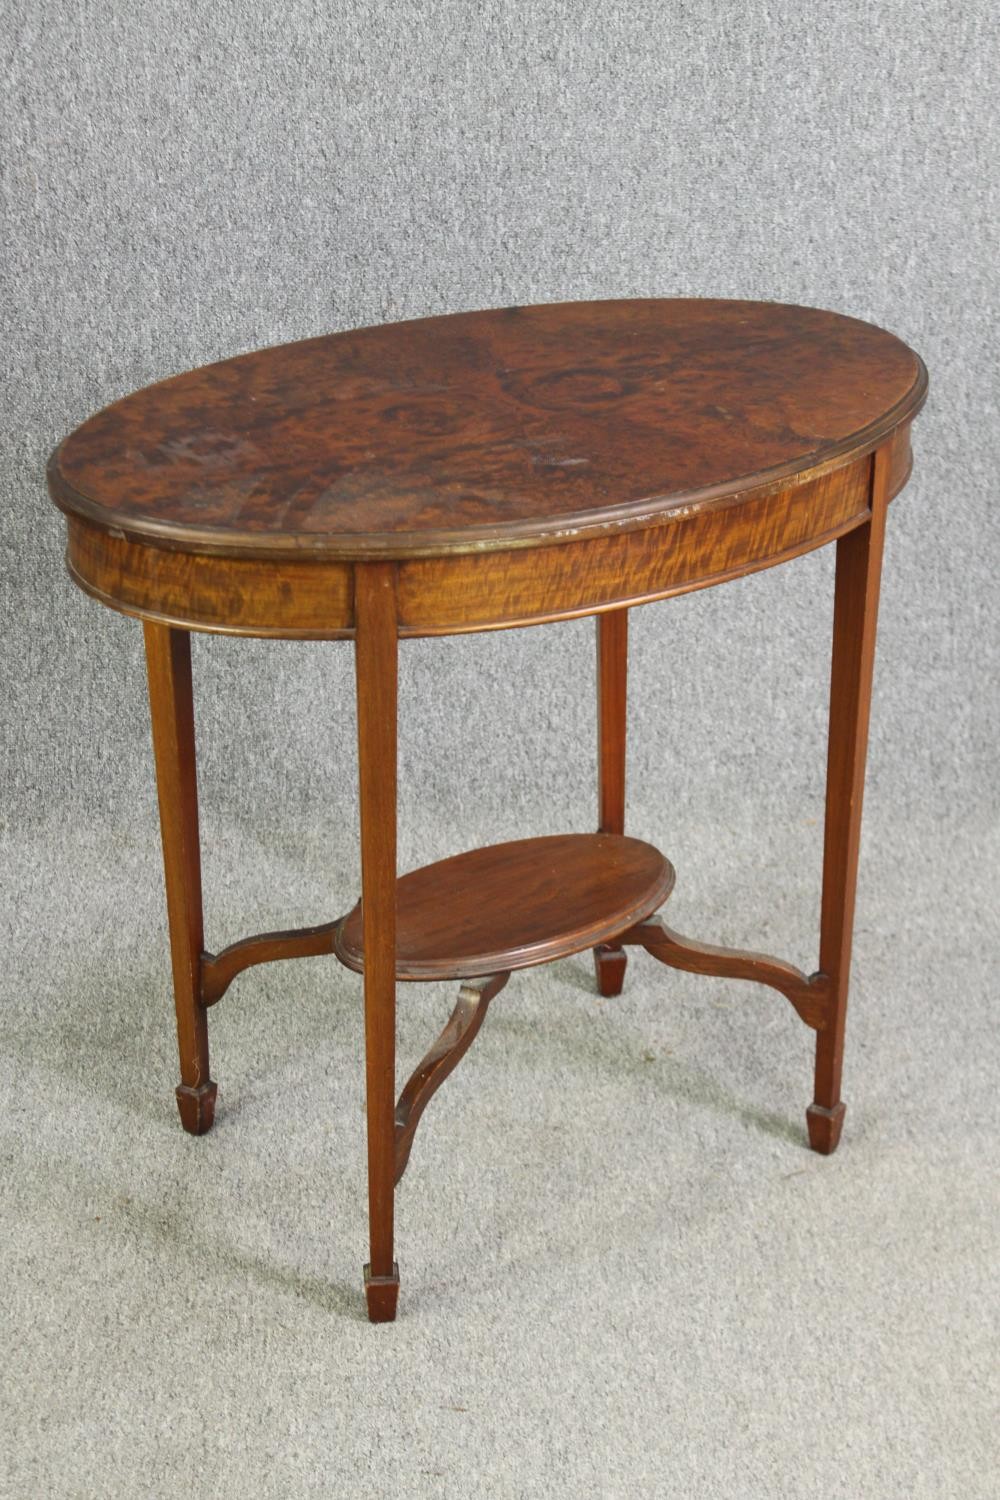 A burr wood side table, 19th century, in the George III style. H.74 W.80 D.53cm. - Image 2 of 5